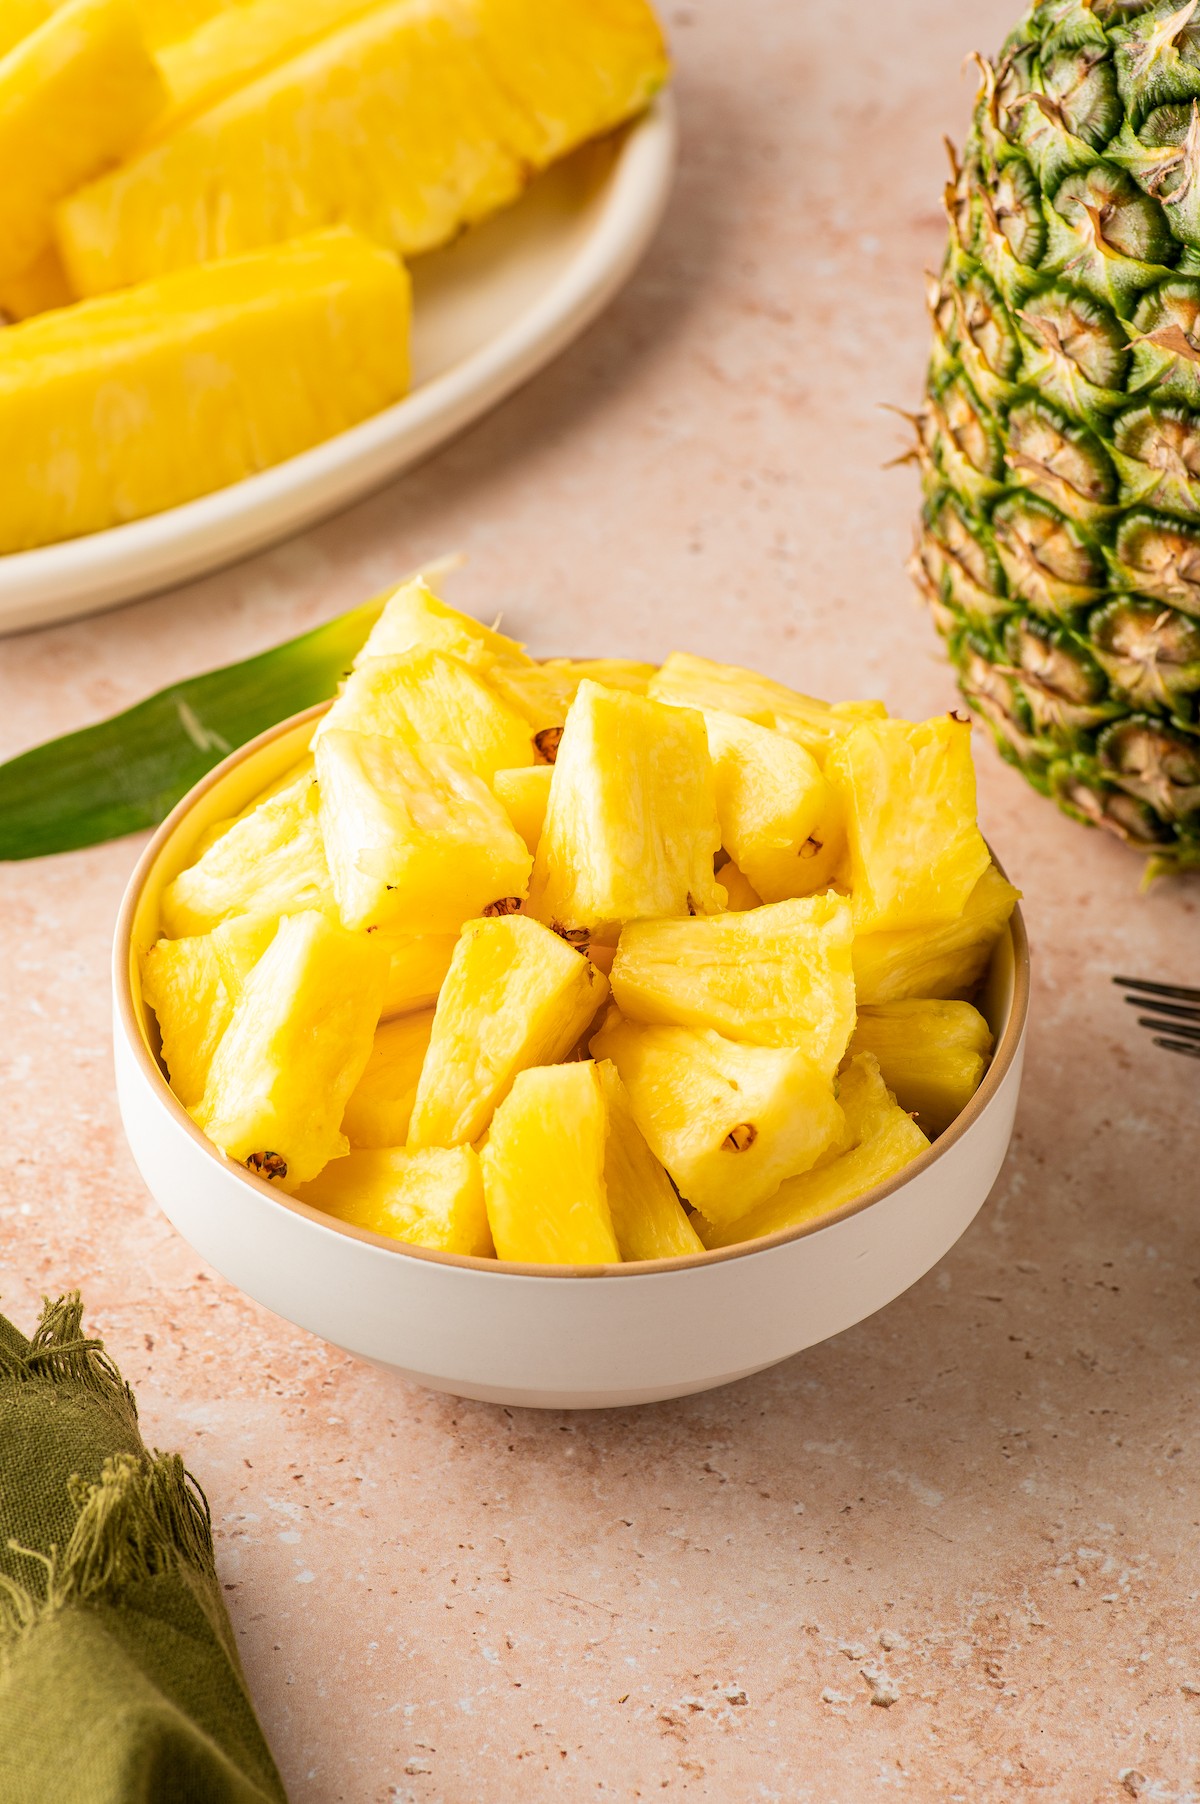 Bite-sized pieces of pineapple in a white bowl.